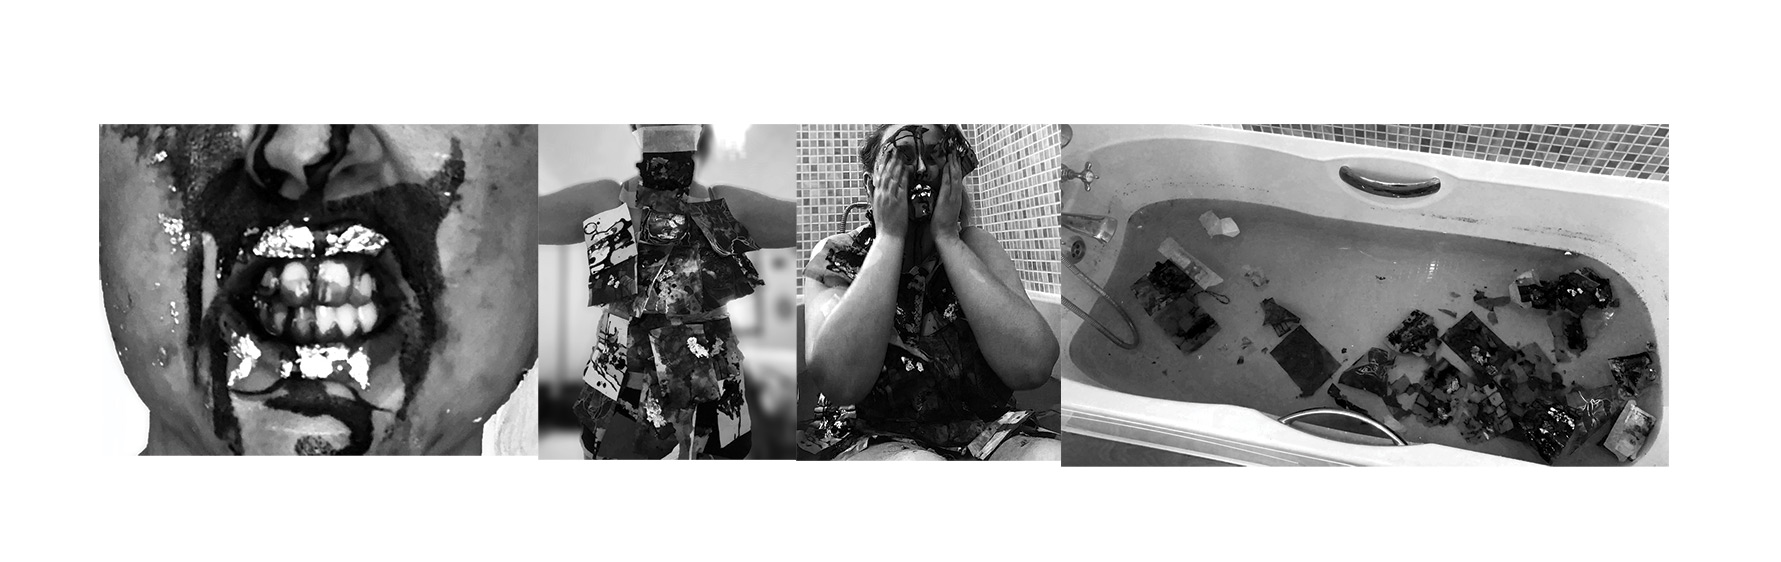 A black and white panel of performances documented in the bath.